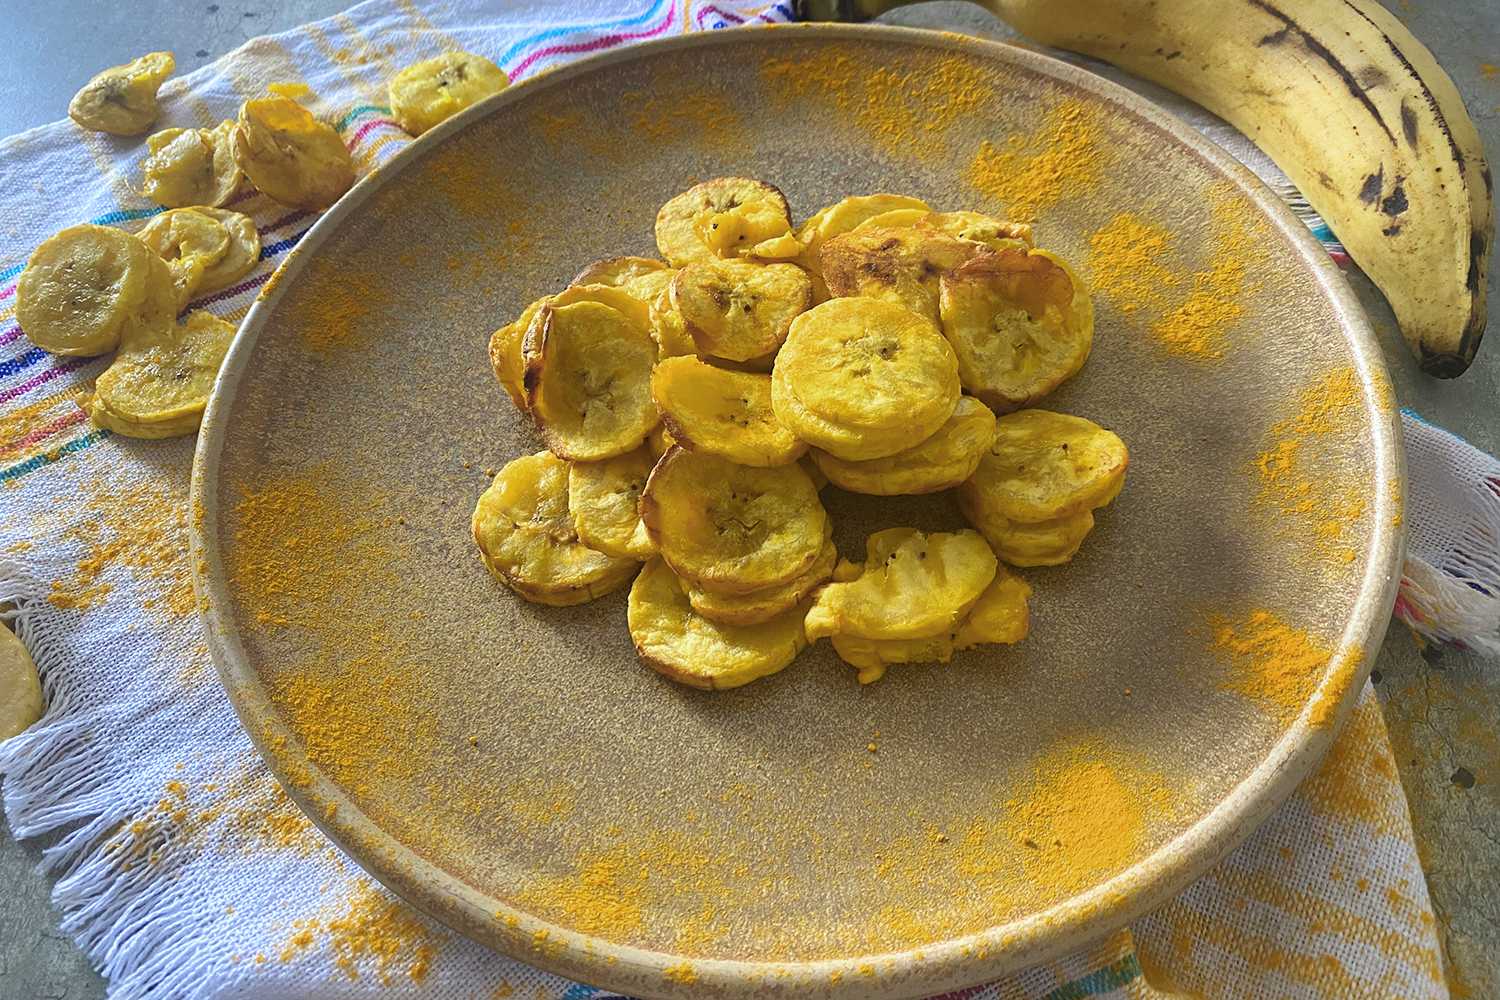 How to Dehydrate Banana Chips with Cinnamon and Sugar